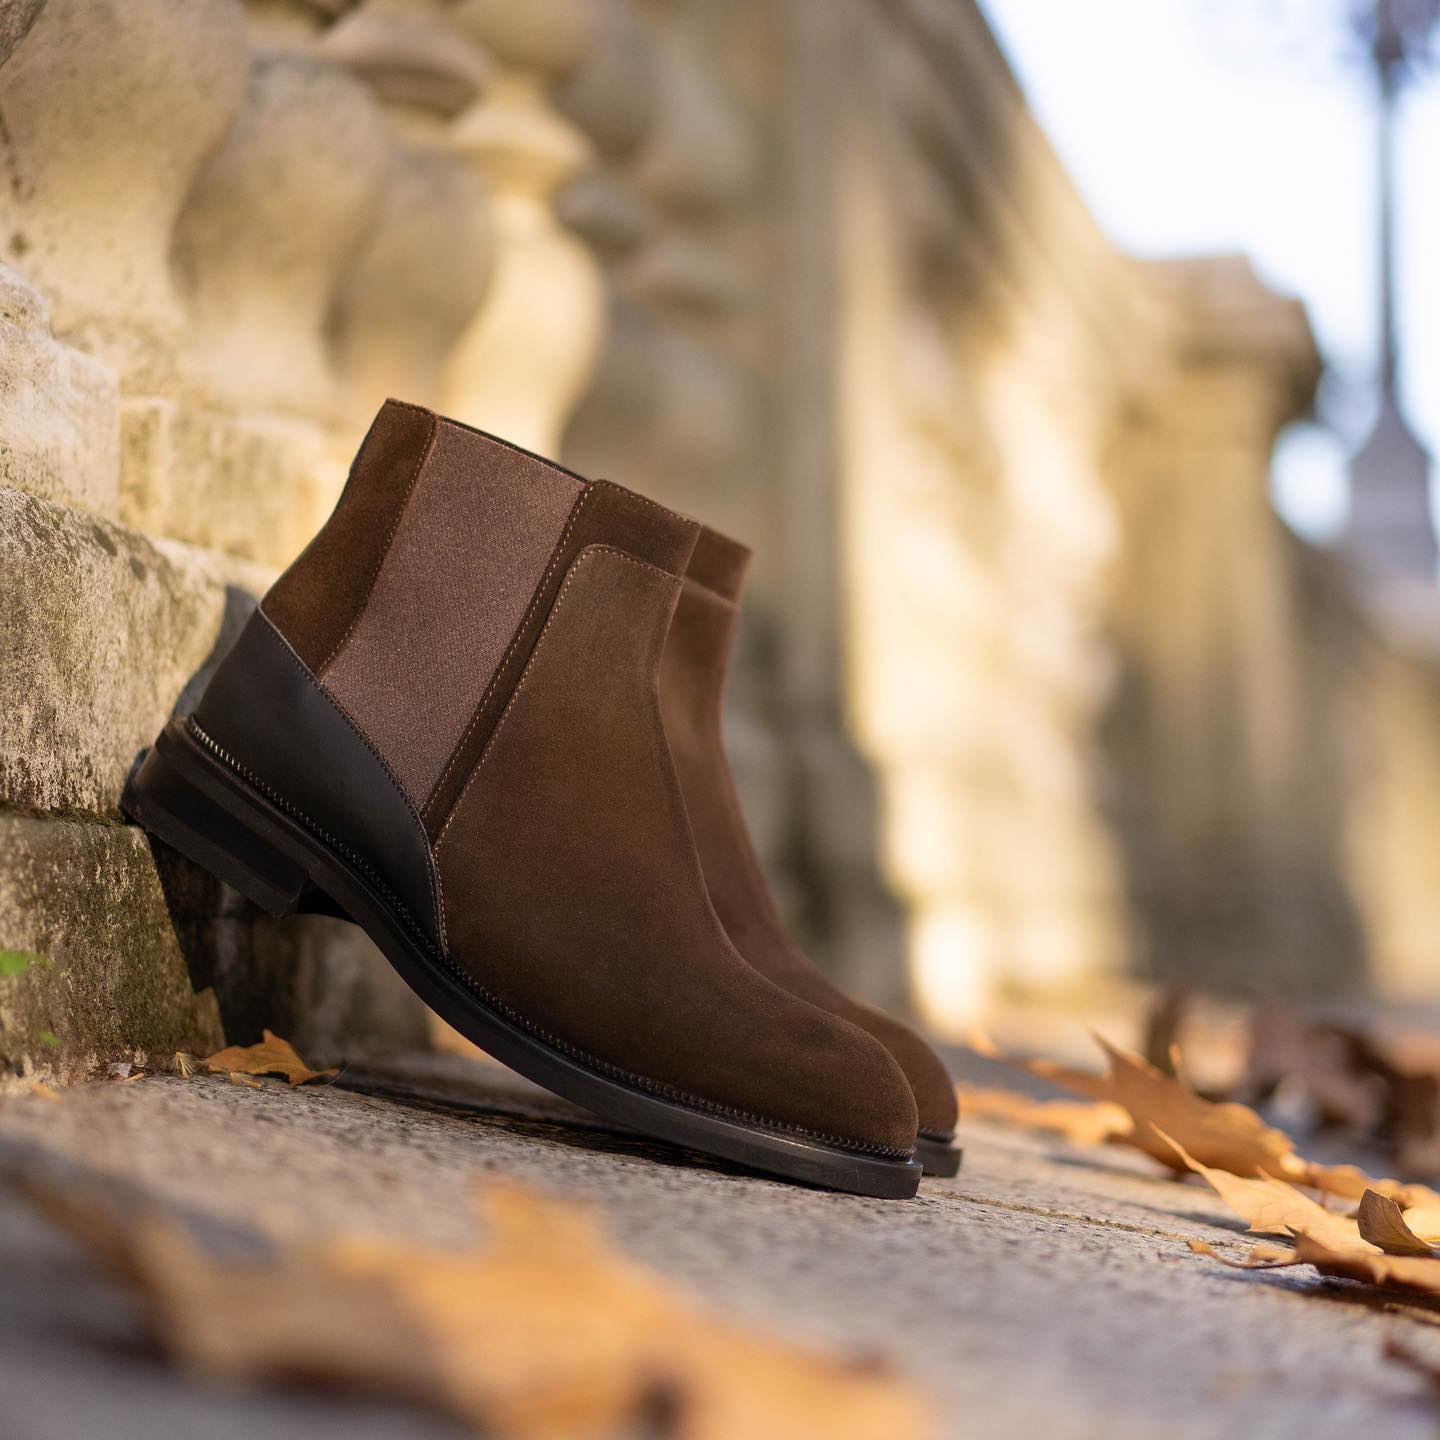 Wearing a carefully handcrafted masterpiece to take a walk at a slow pace, in dreamy light and warm color shades. #journeythroughtime #atestoni #fw20 #italiandesign #madeinbolognasince1929 #luxury #luxuryattire #finecraftsmanship #italianshoes #italianshoes